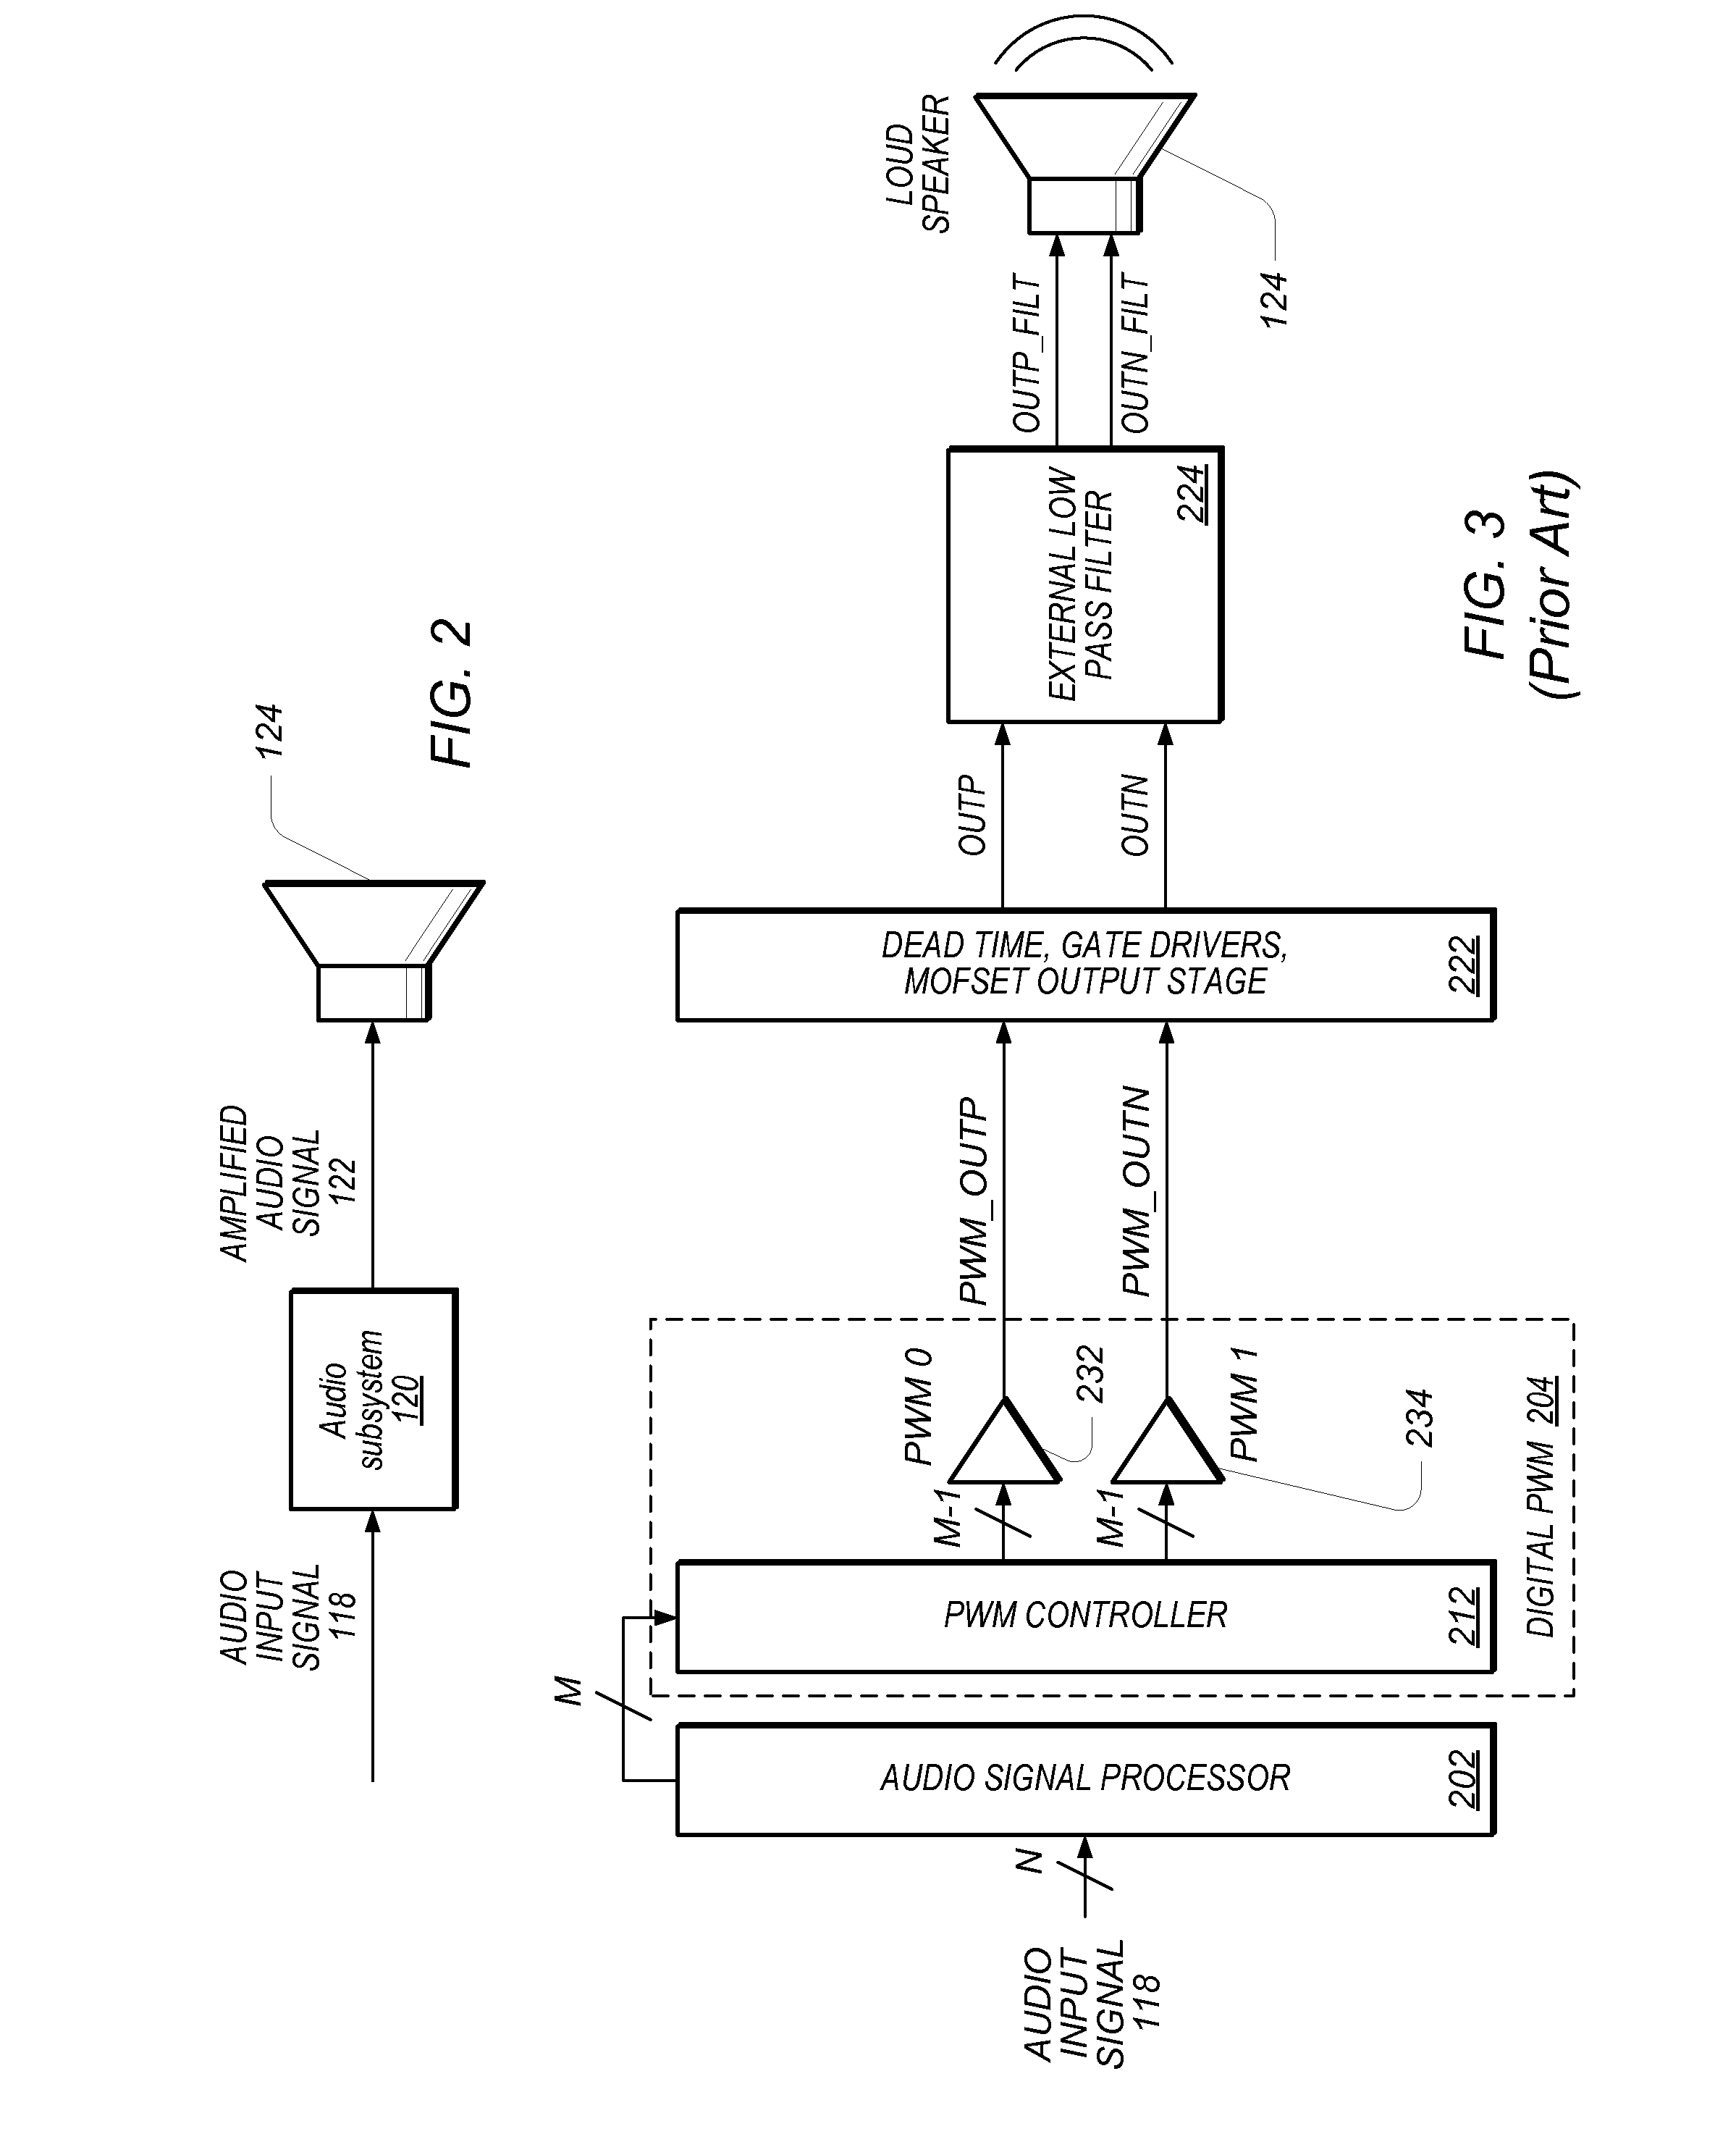 Output Power Limiter in an Audio Amplifier